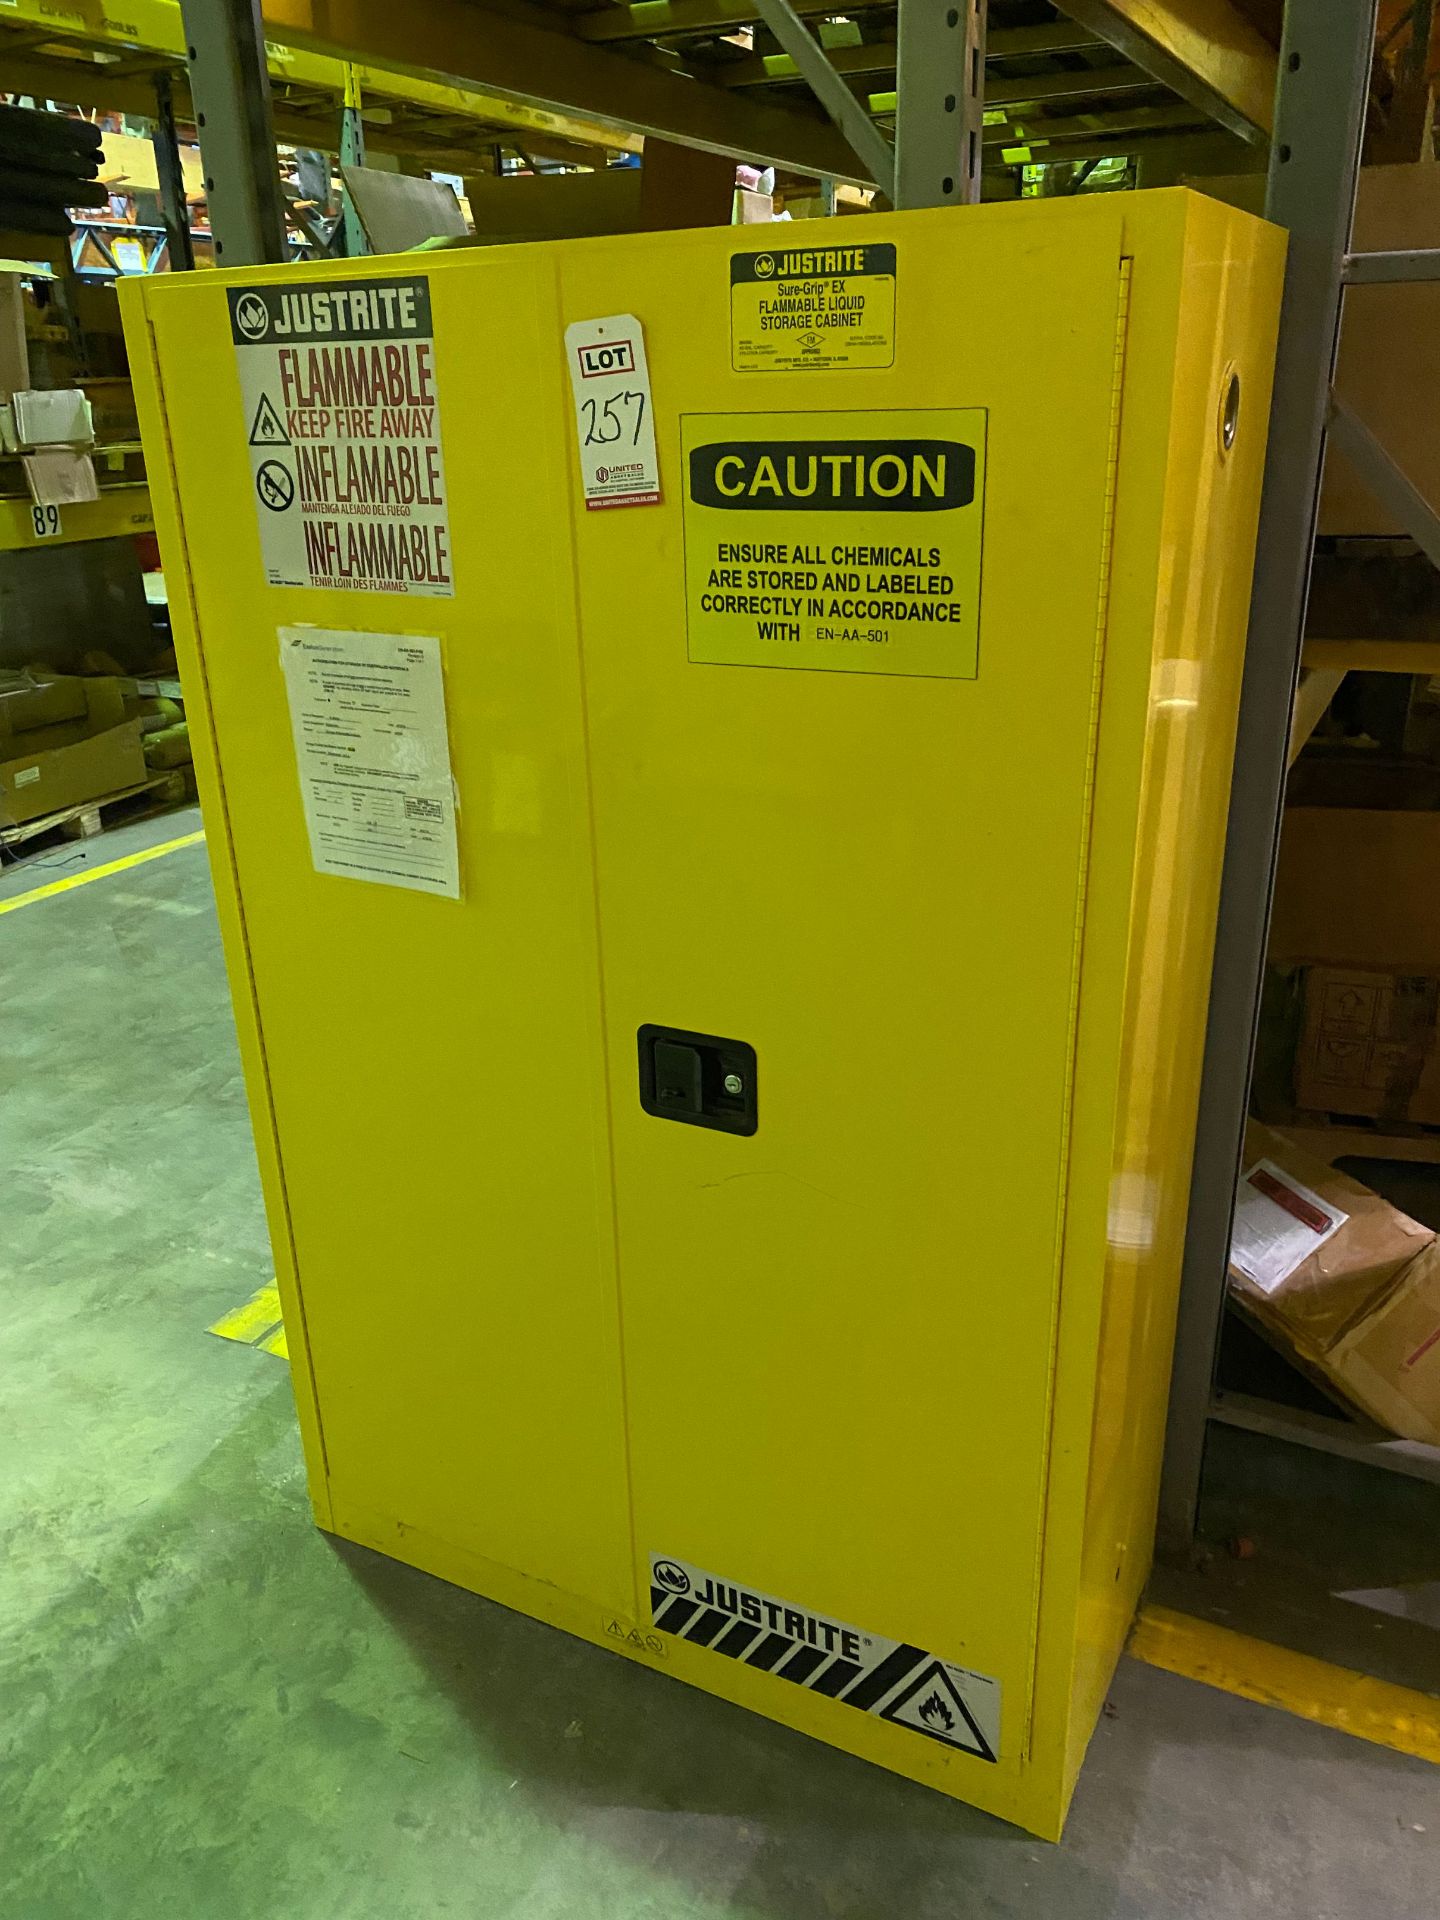 JUSTRITE FLAMMABLE STORAGE CABINET 43"W X 18"D X 66"H